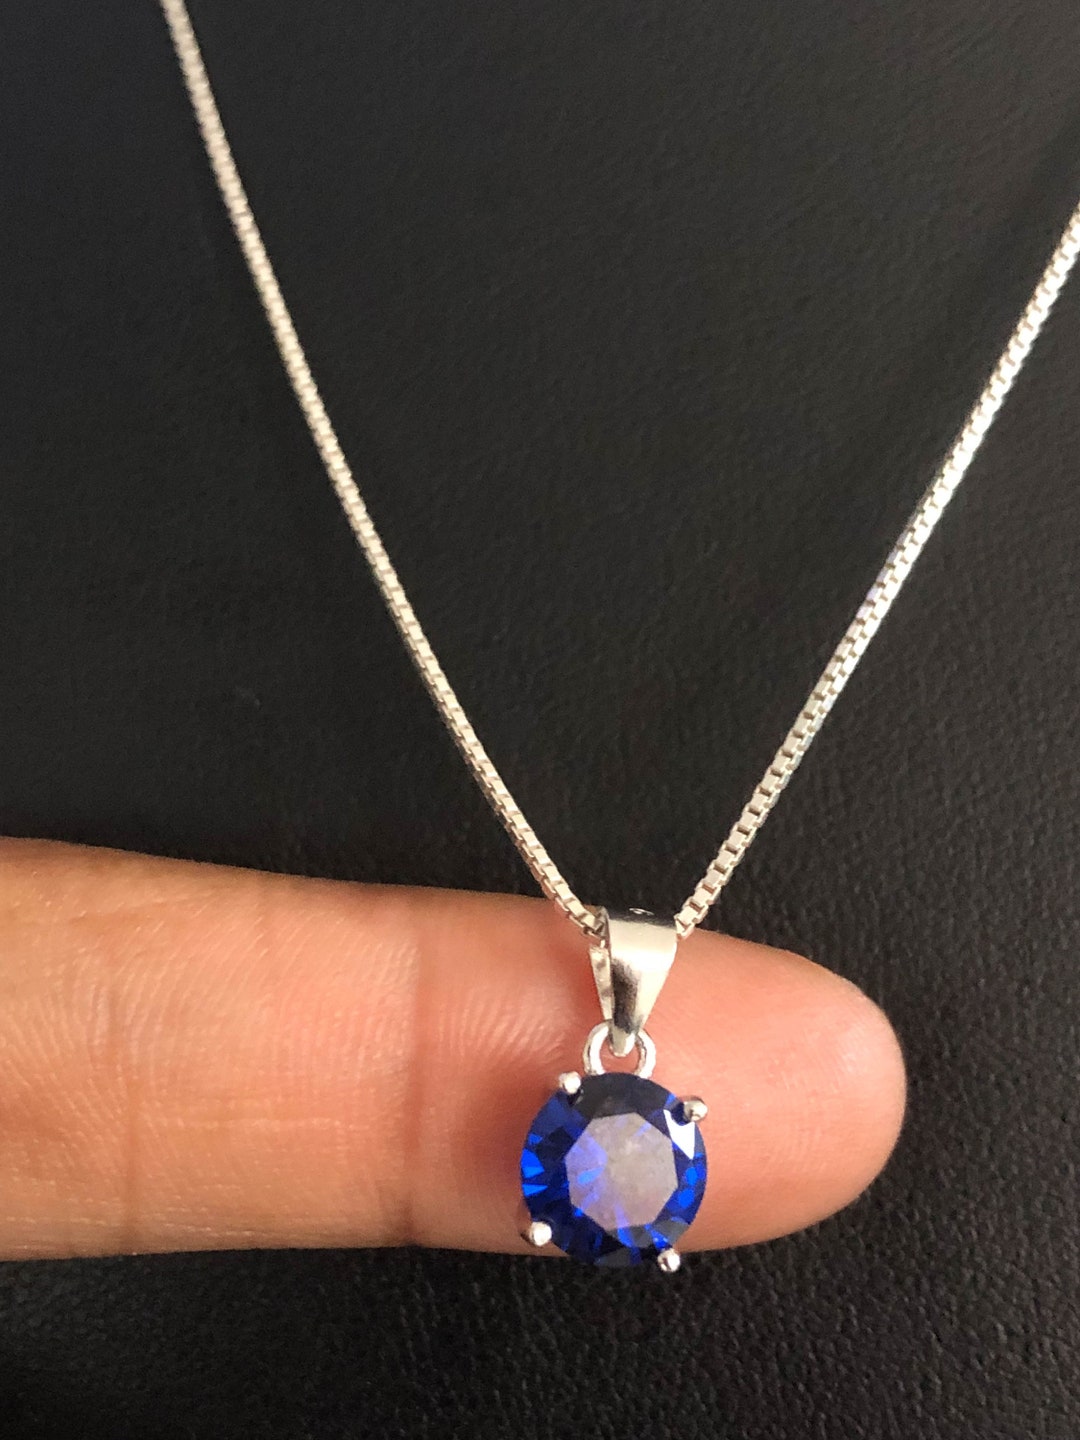 Blue Sapphire Necklace Sterling Silver Sapphire Pendant - Etsy